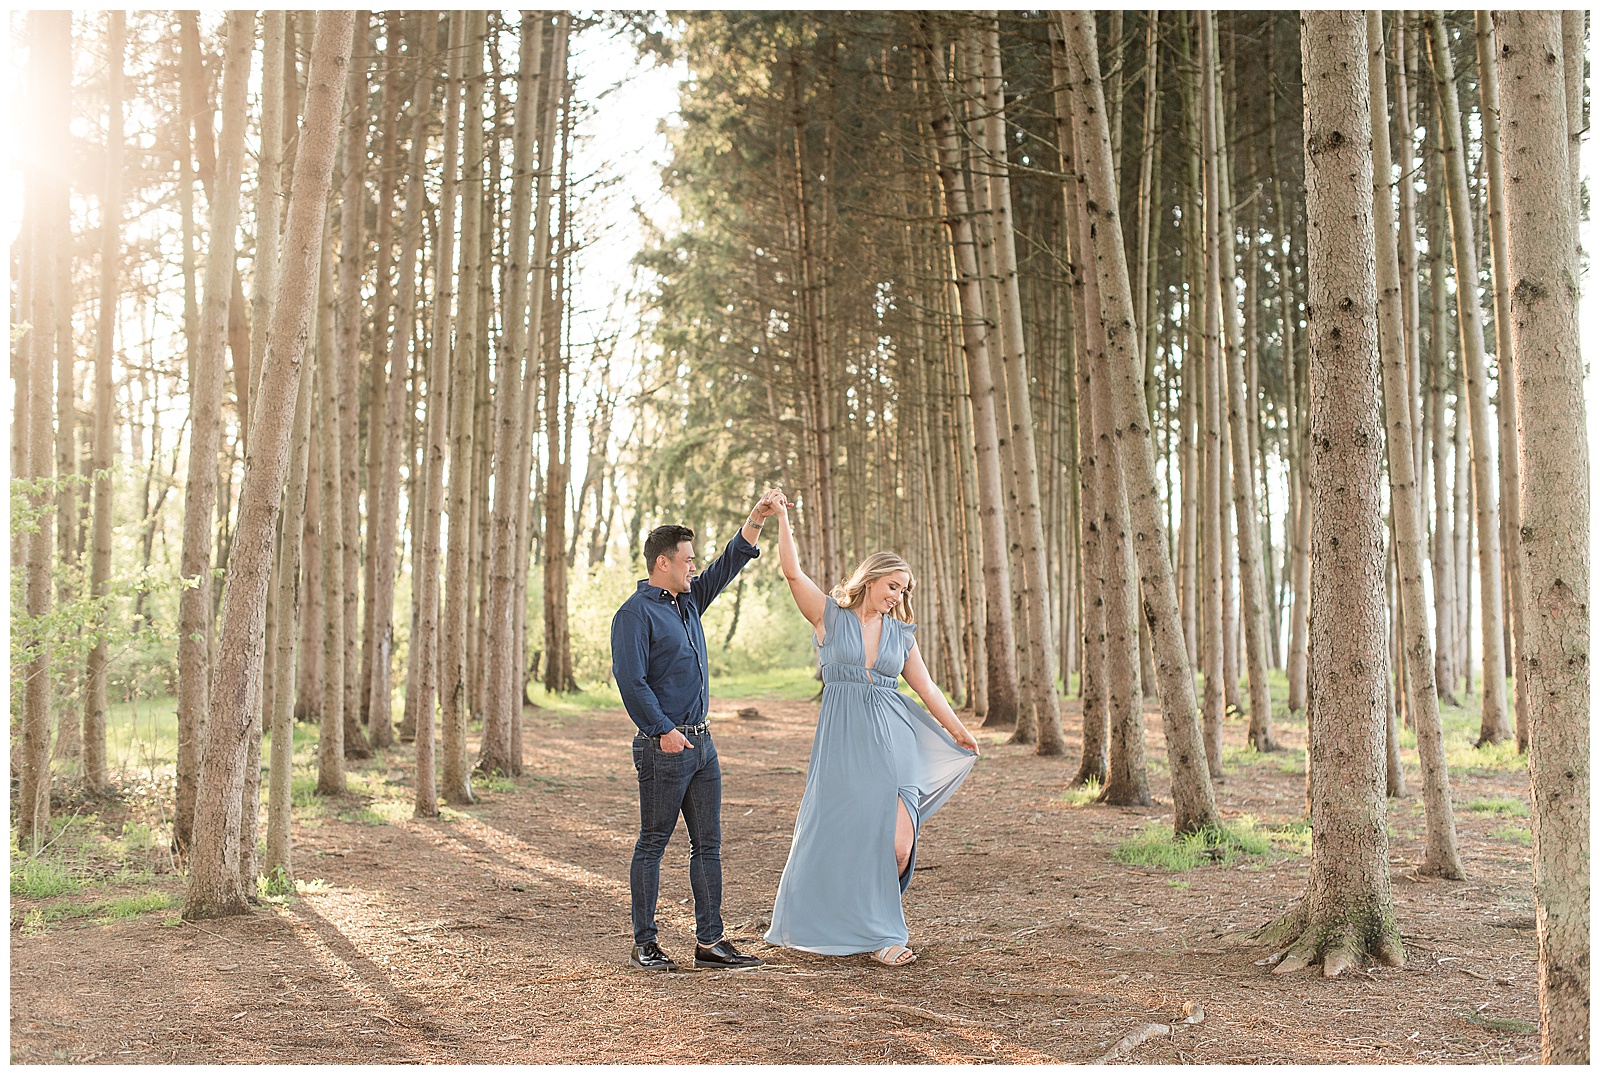 guy twirling girl who's wearing light blue flowy dress in between grove of pine trees in lancaster pennsylvania